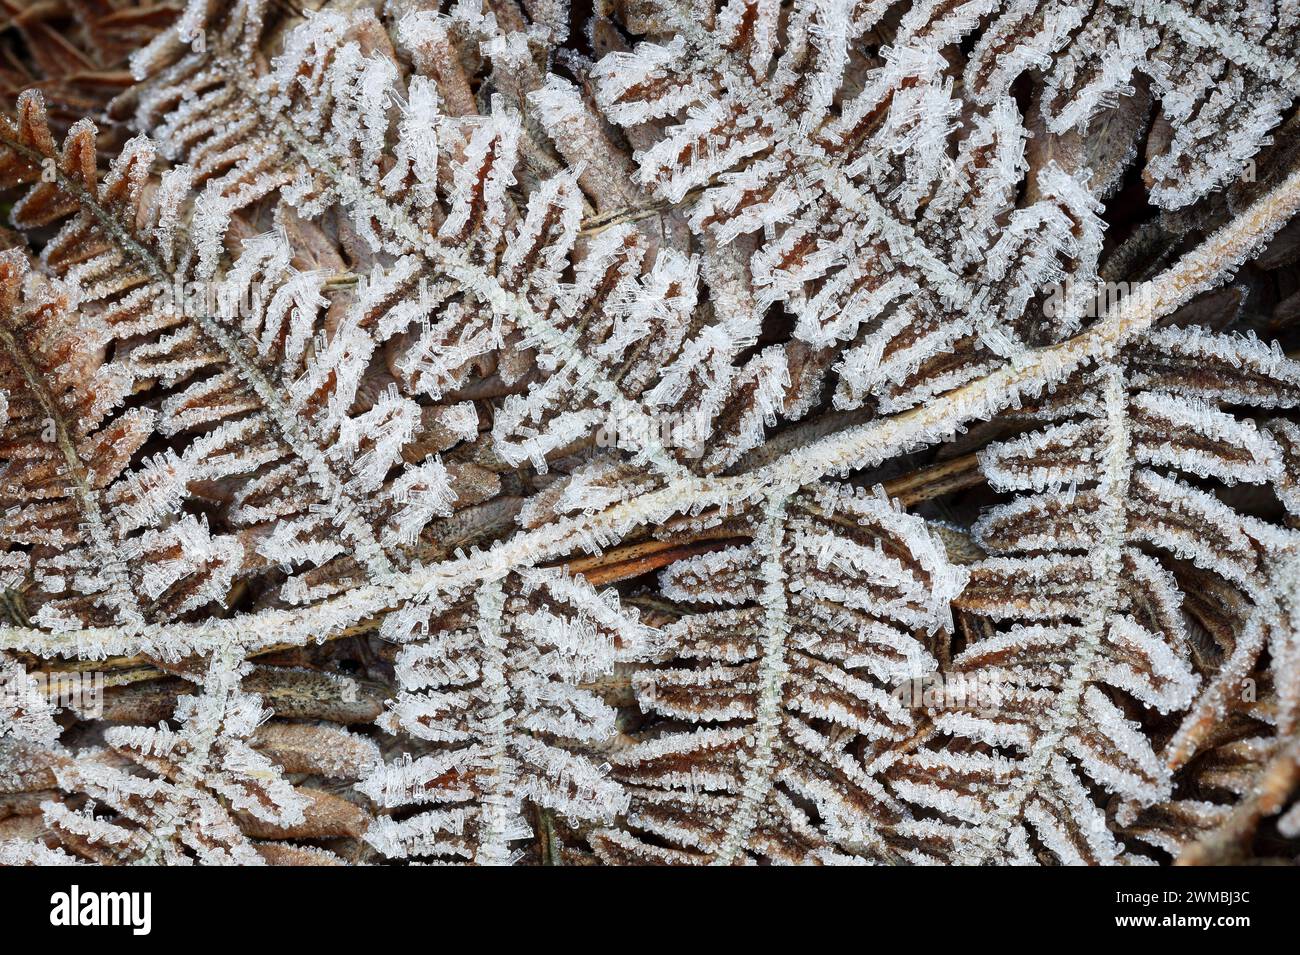 Frost Covered Common Bracken Fronds (Pteridium aquilinum), North Pennines, Teesdale, County Durham, Regno Unito Foto Stock